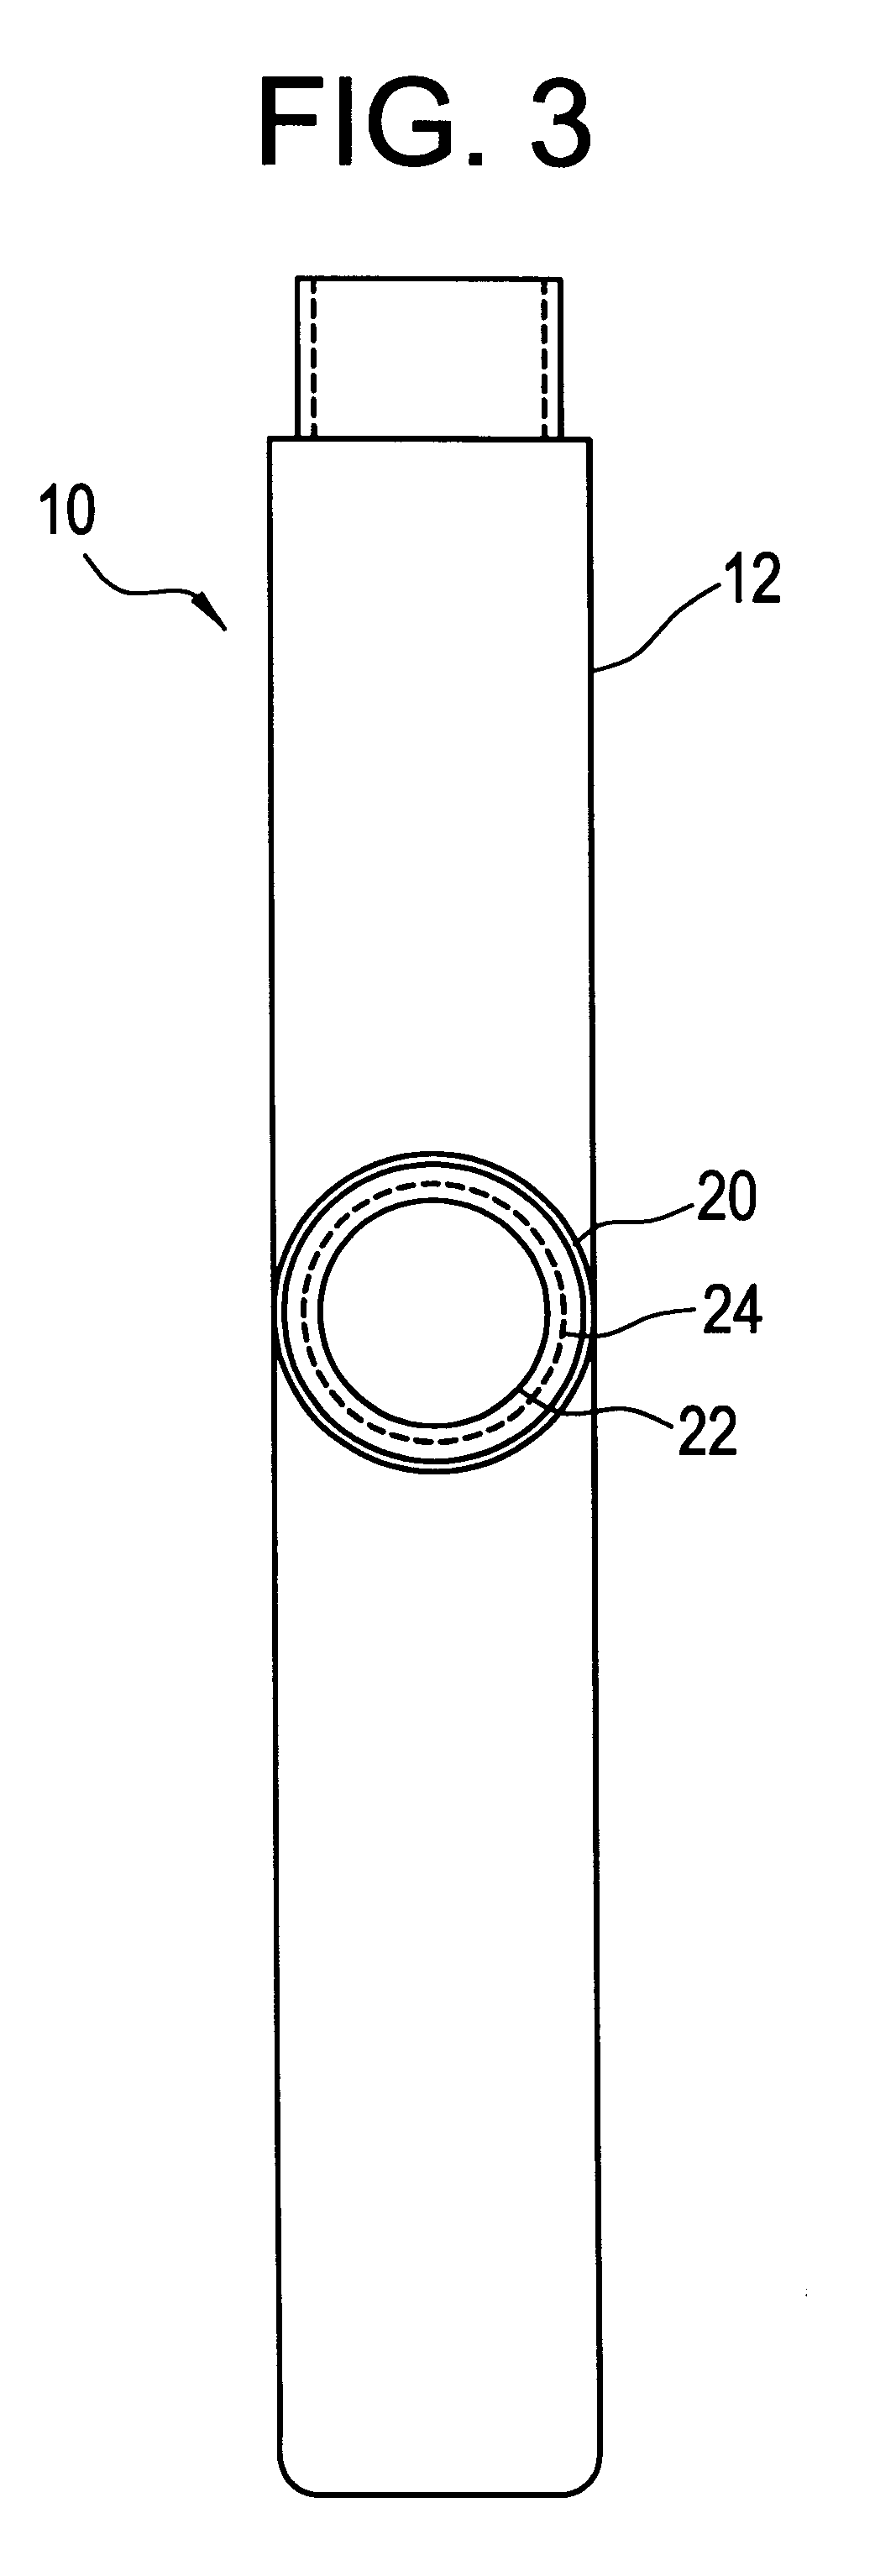 Support structure for attachment to automotive cigarette lighter receptacle